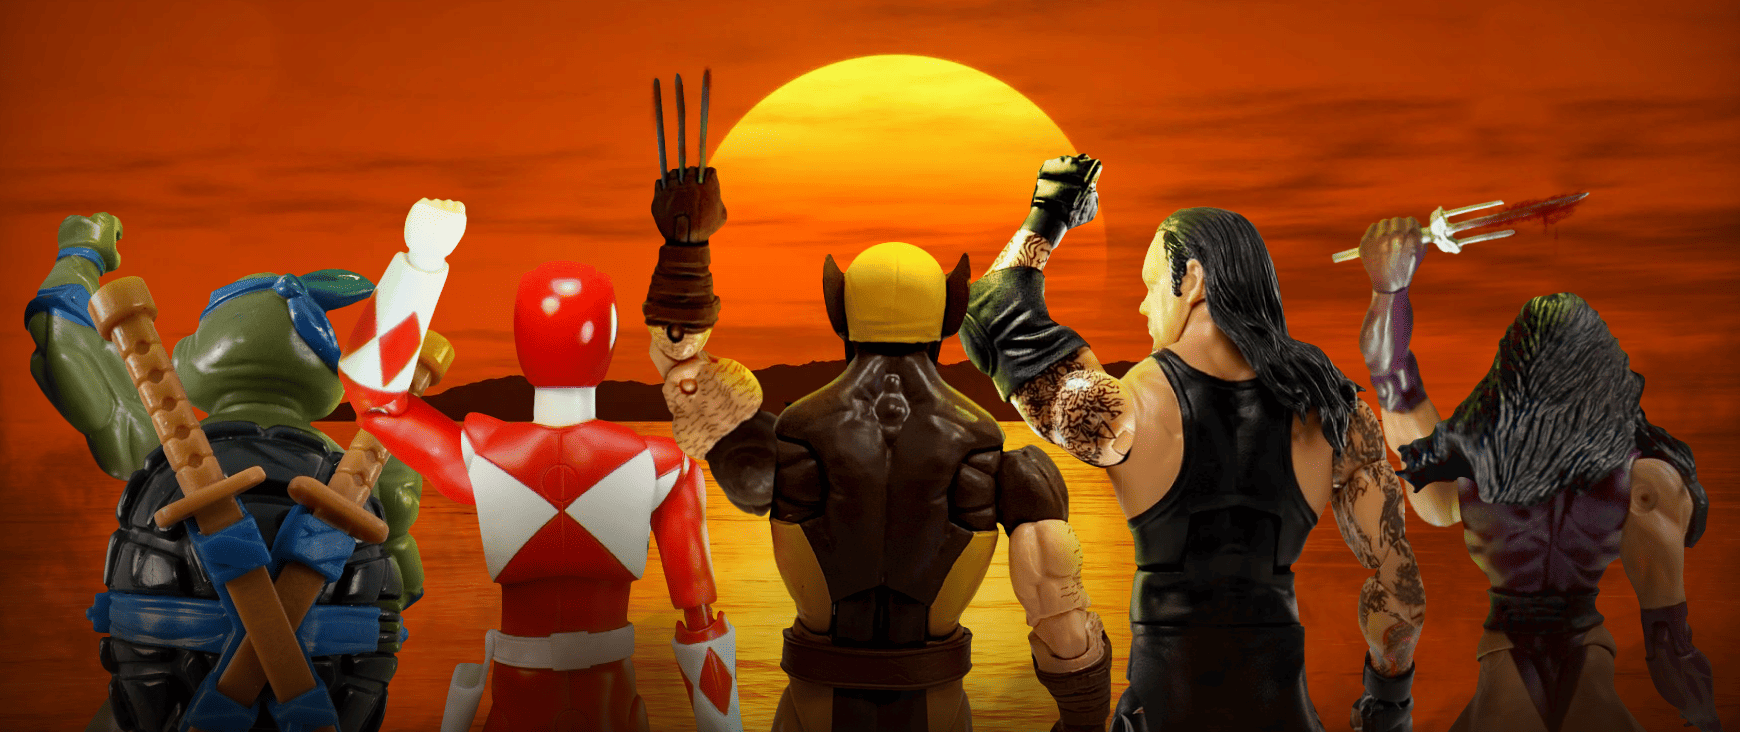 90s iconic action figures toys